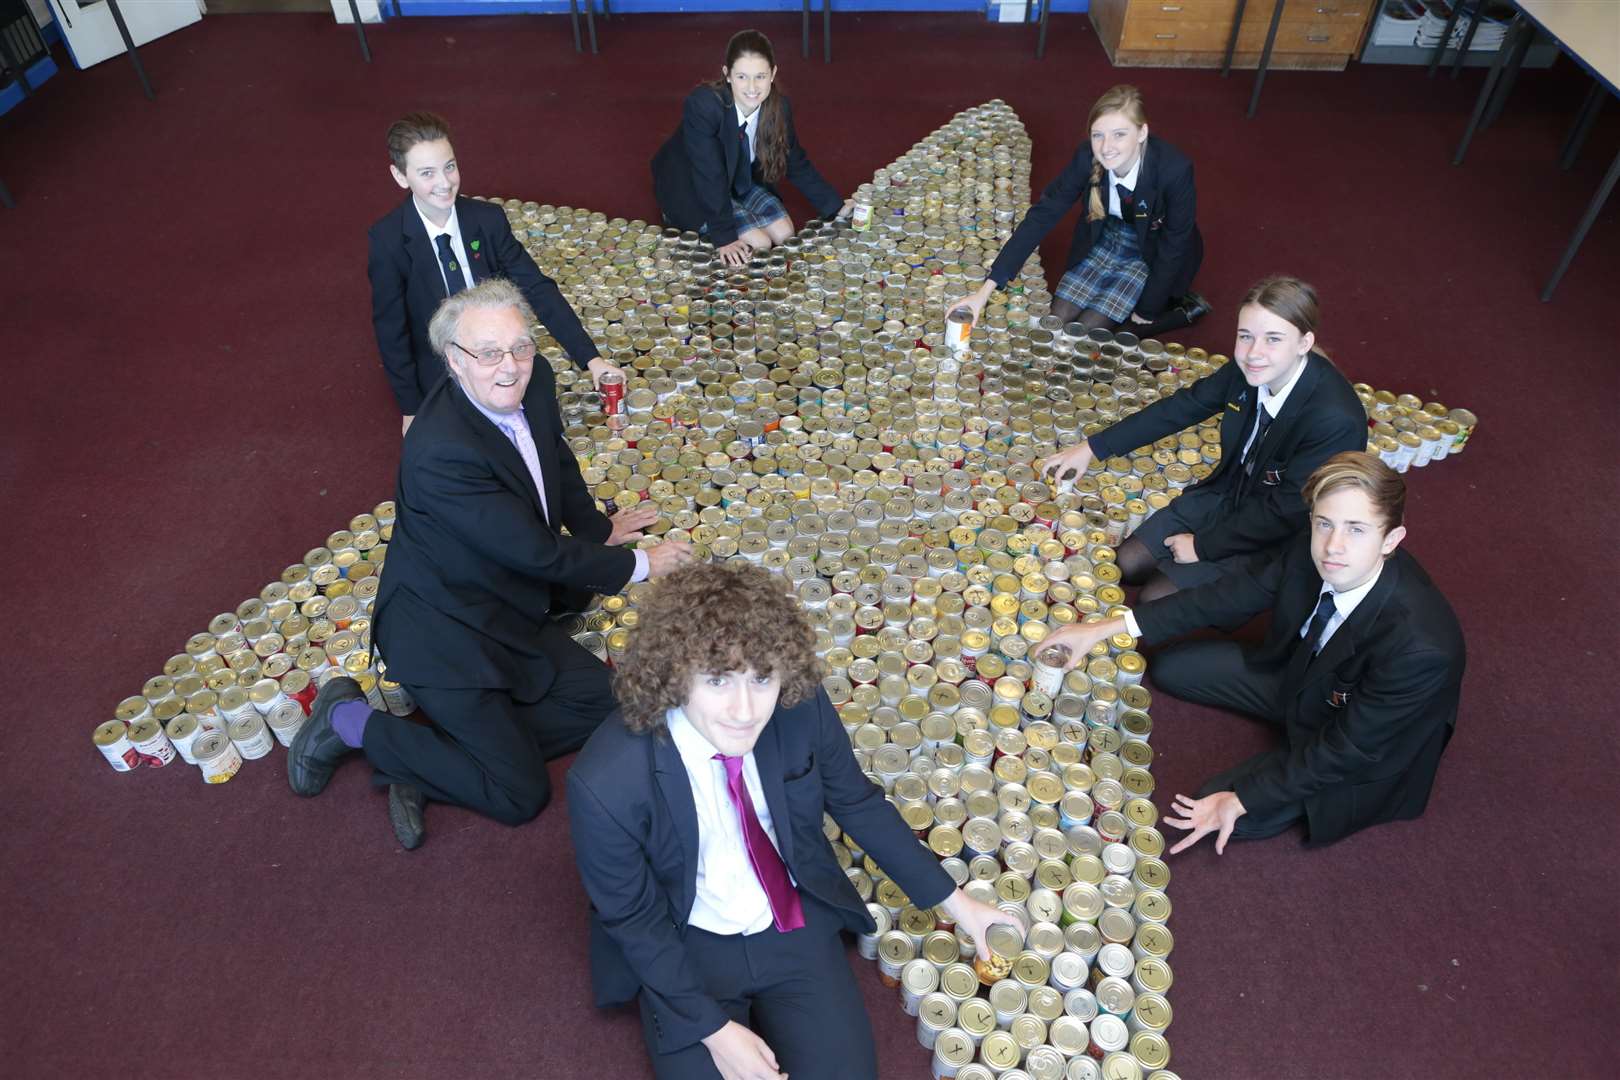 St Simon Stock students hand over 1,000 cans to the You Can Help appeal